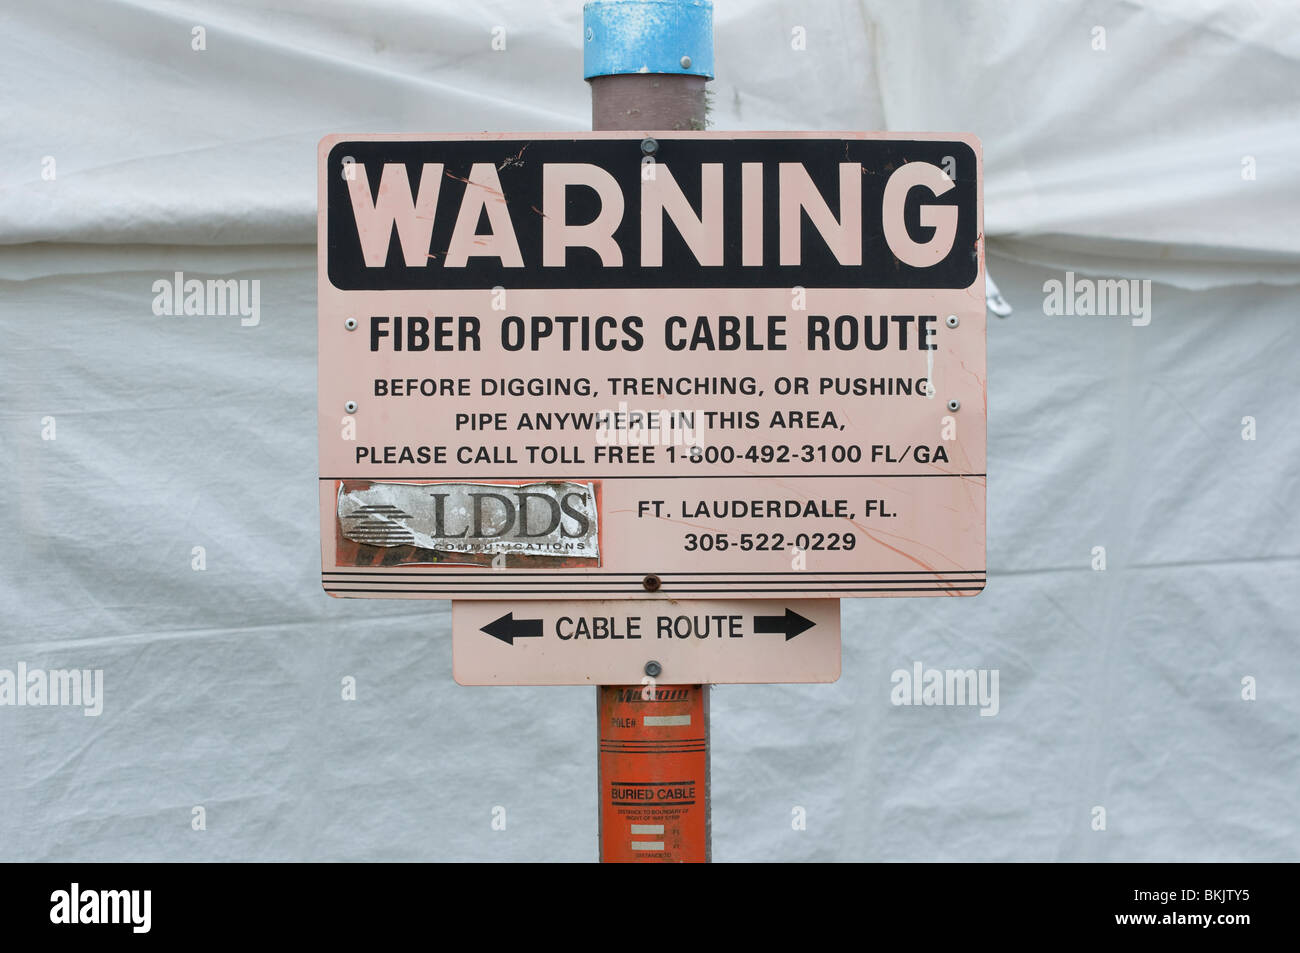 fiber optics cable route warning sign Stock Photo